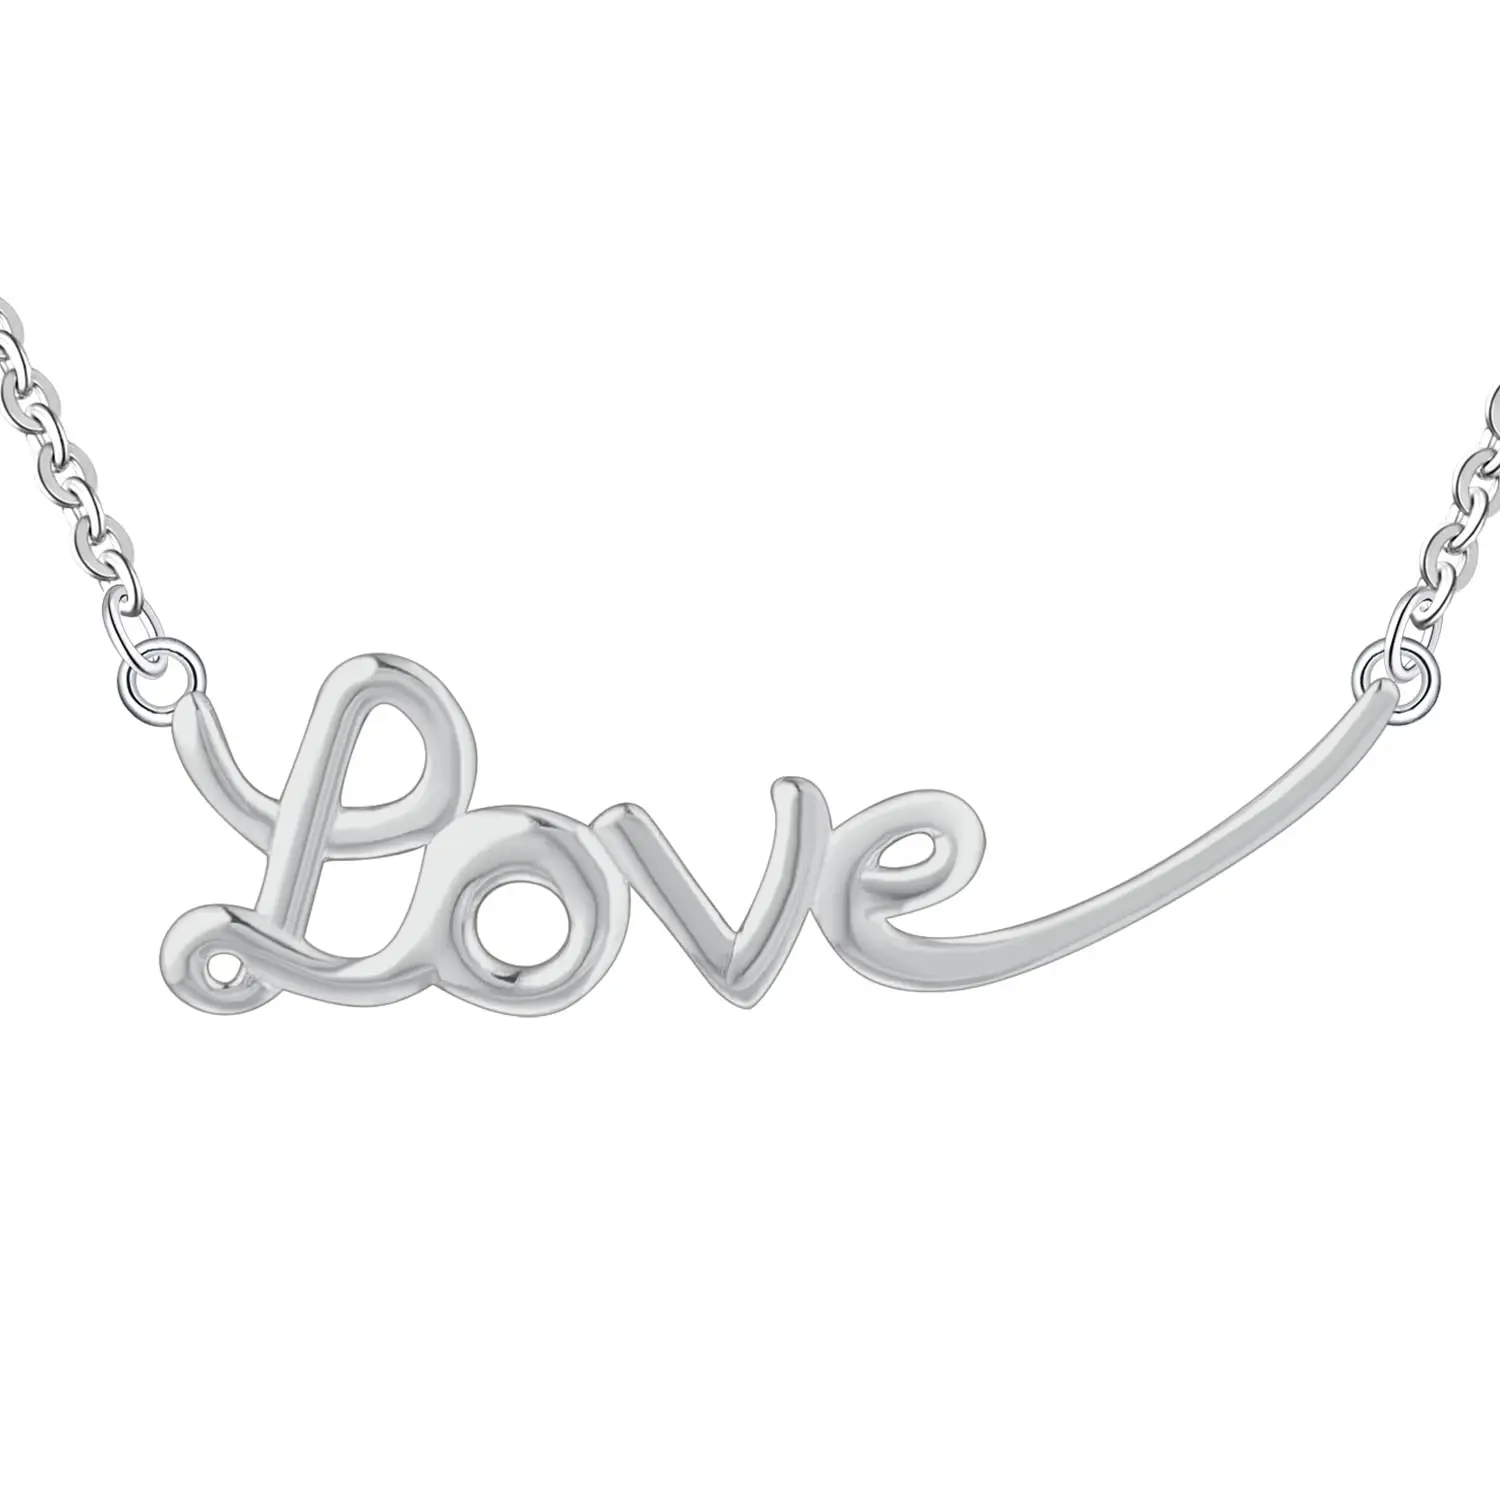 Custom Diy Design 925 Sterling Silver Rose Gold Plated Name Love Necklace Personalized